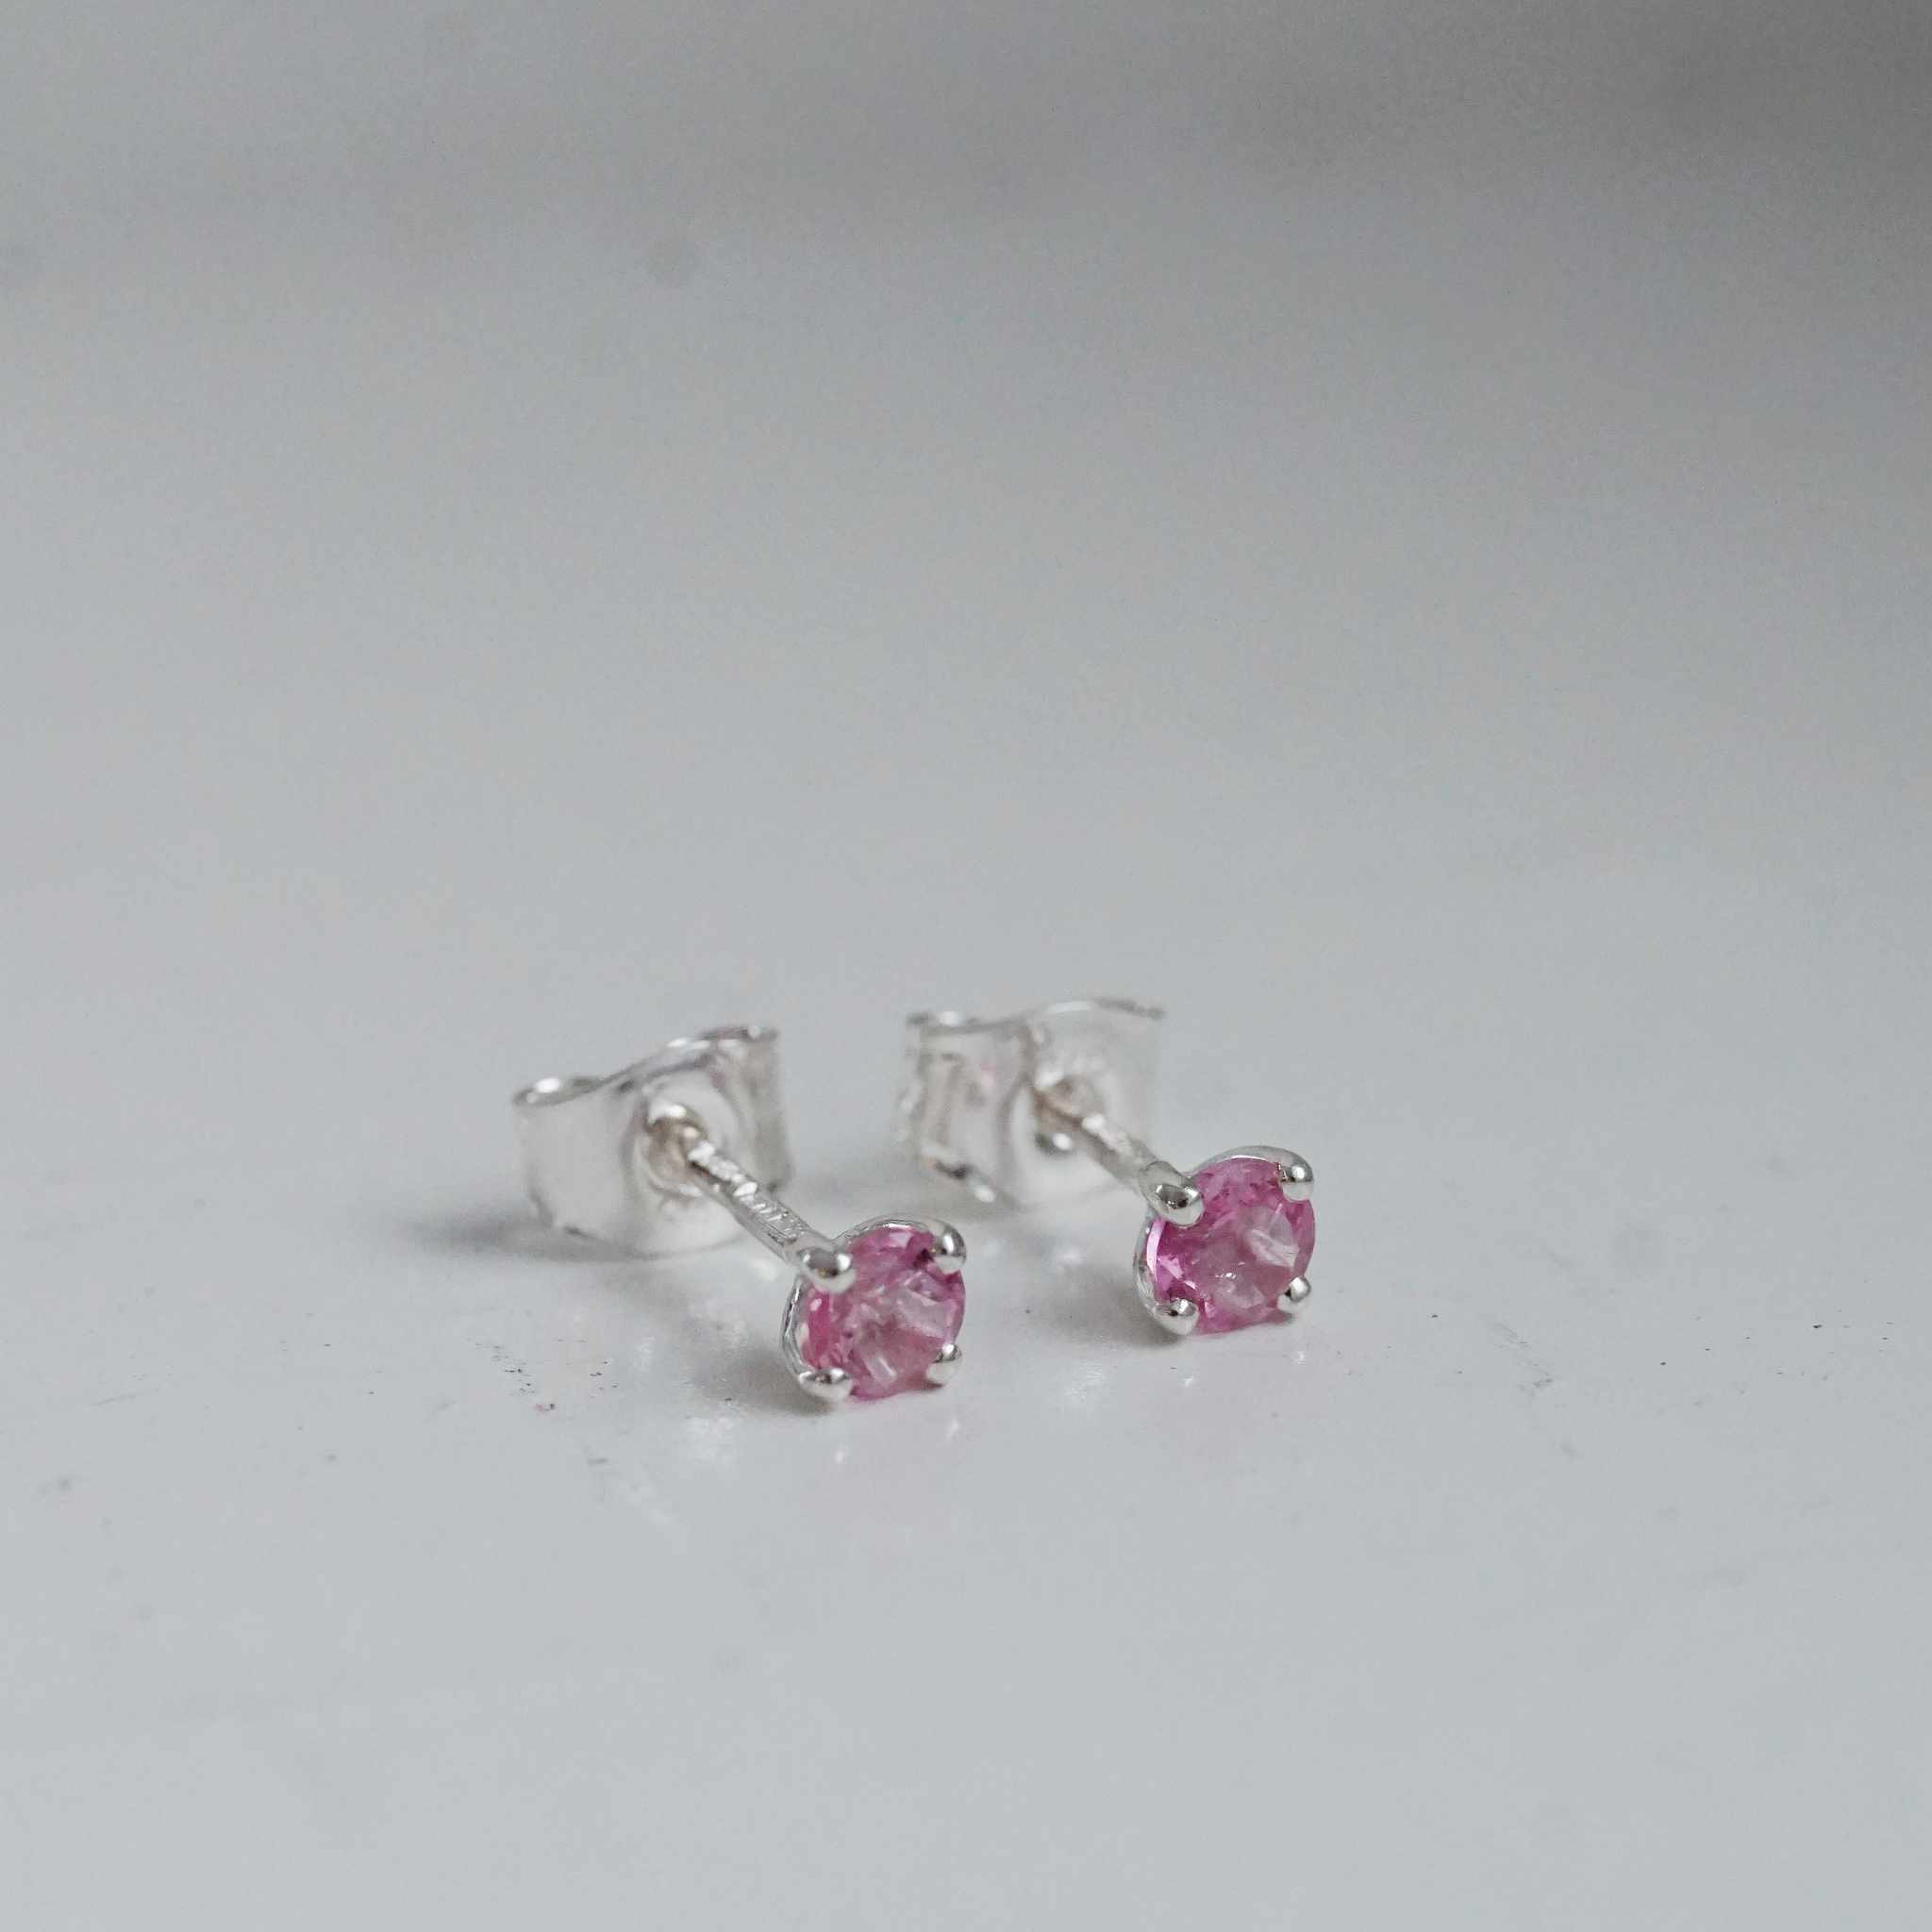 "Stellar" earstuds in silver with pink tourmaline